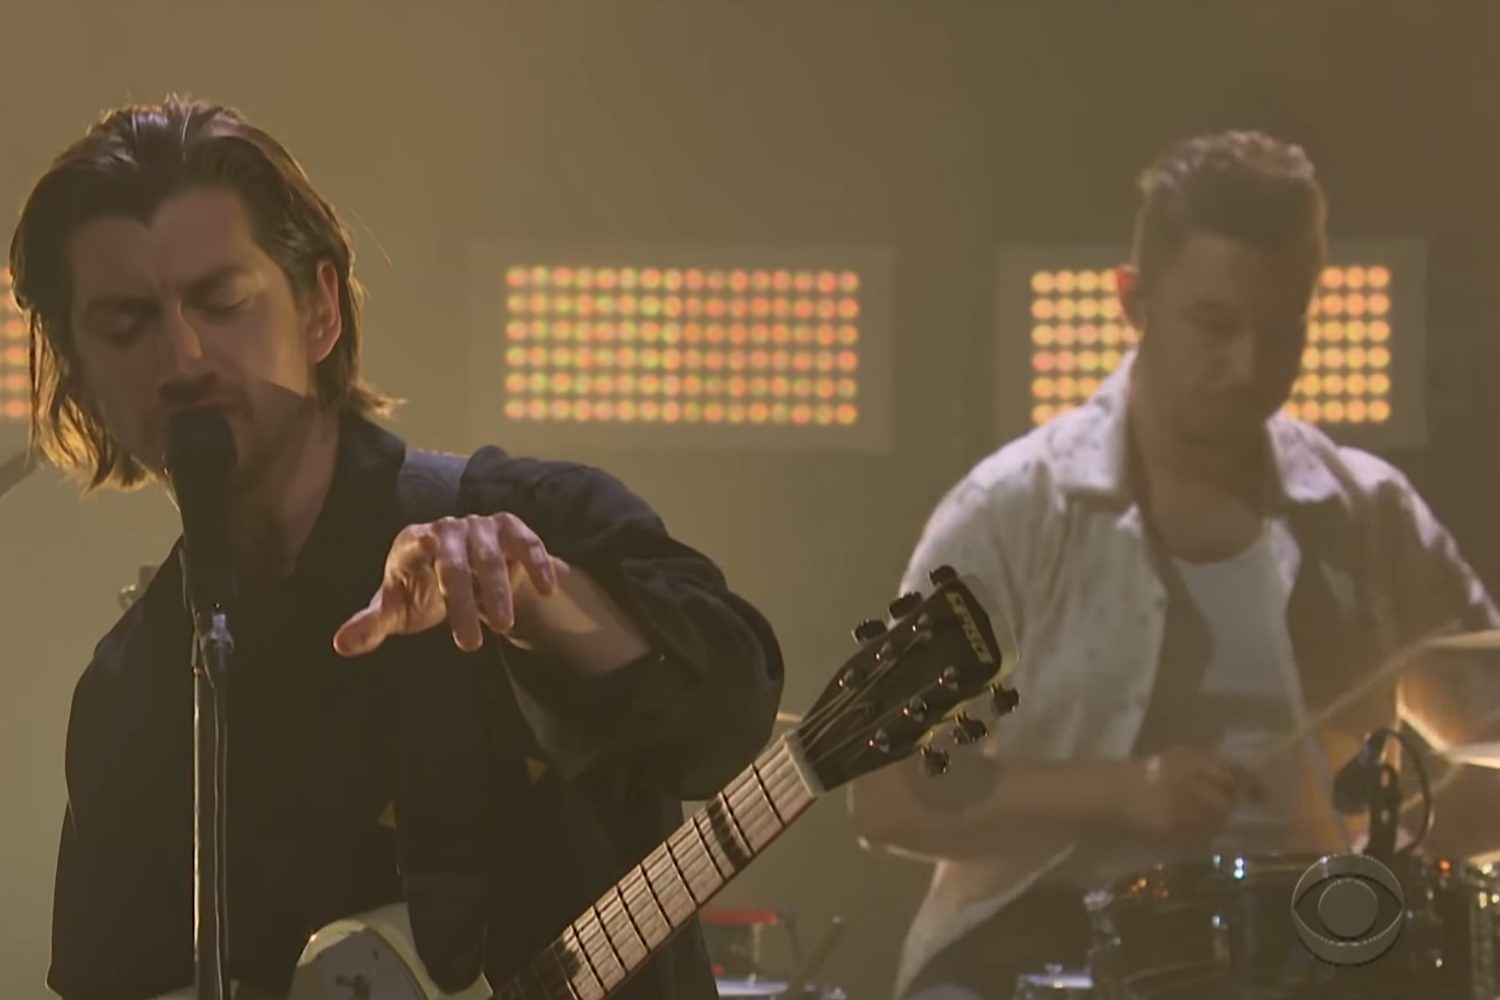 Watch Arctic Monkeys bring ‘One Point Perspective’ to the telly!